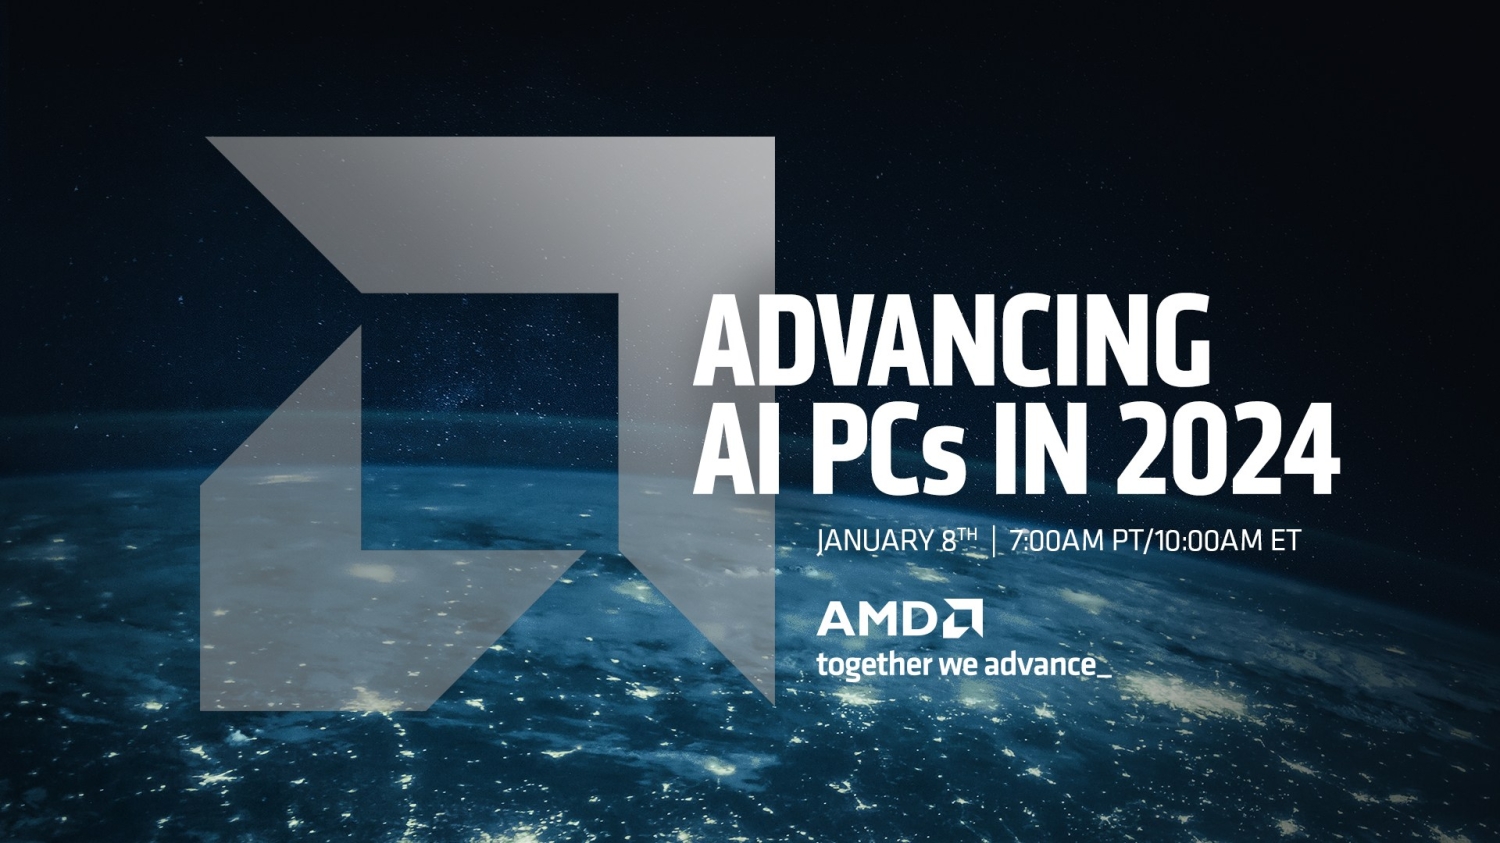 AMD's CES 2024 presentation will be all about 'the future of AI in